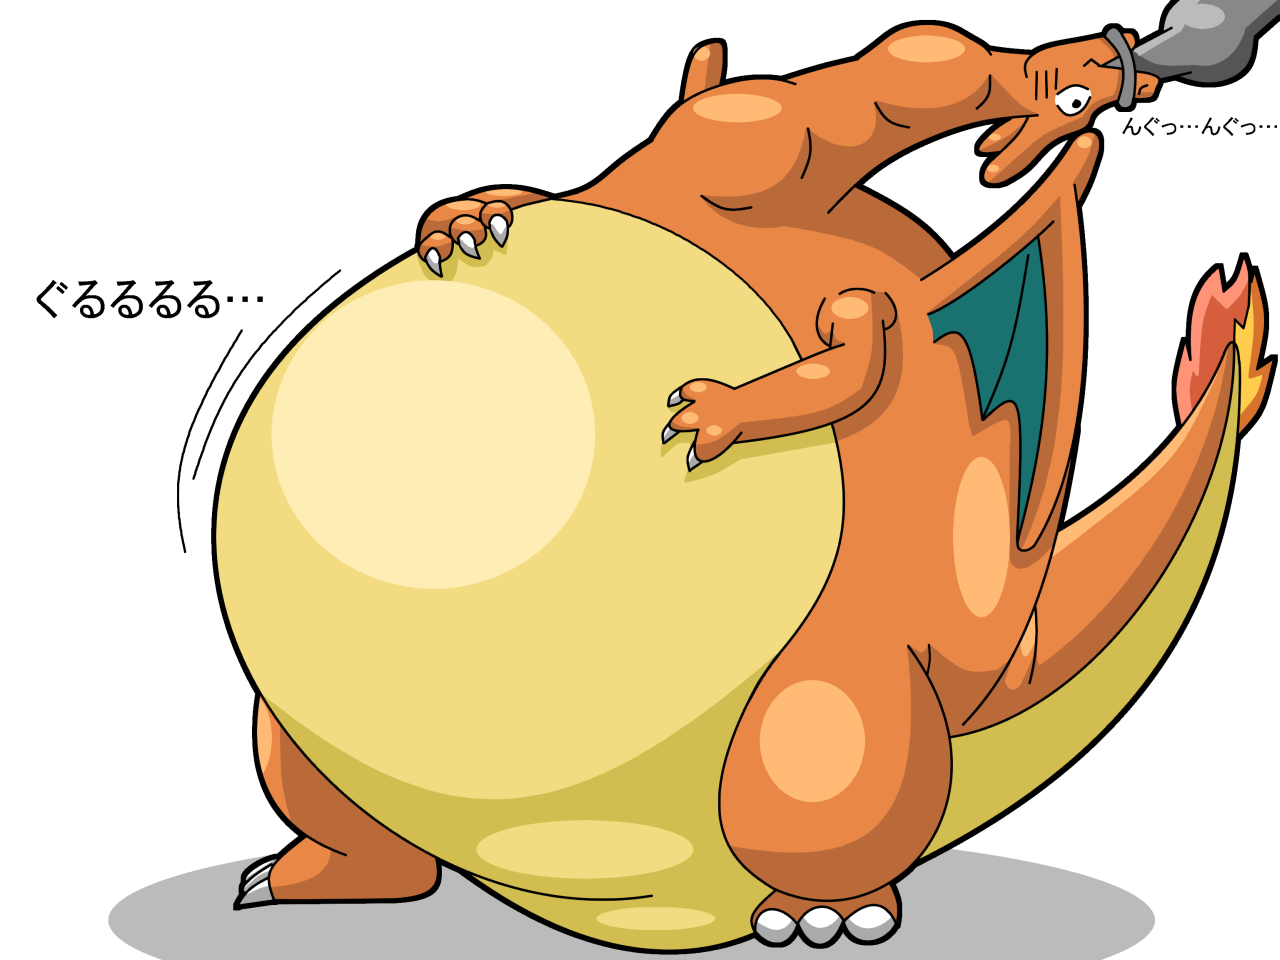 charizard inflation pt.2/4. 